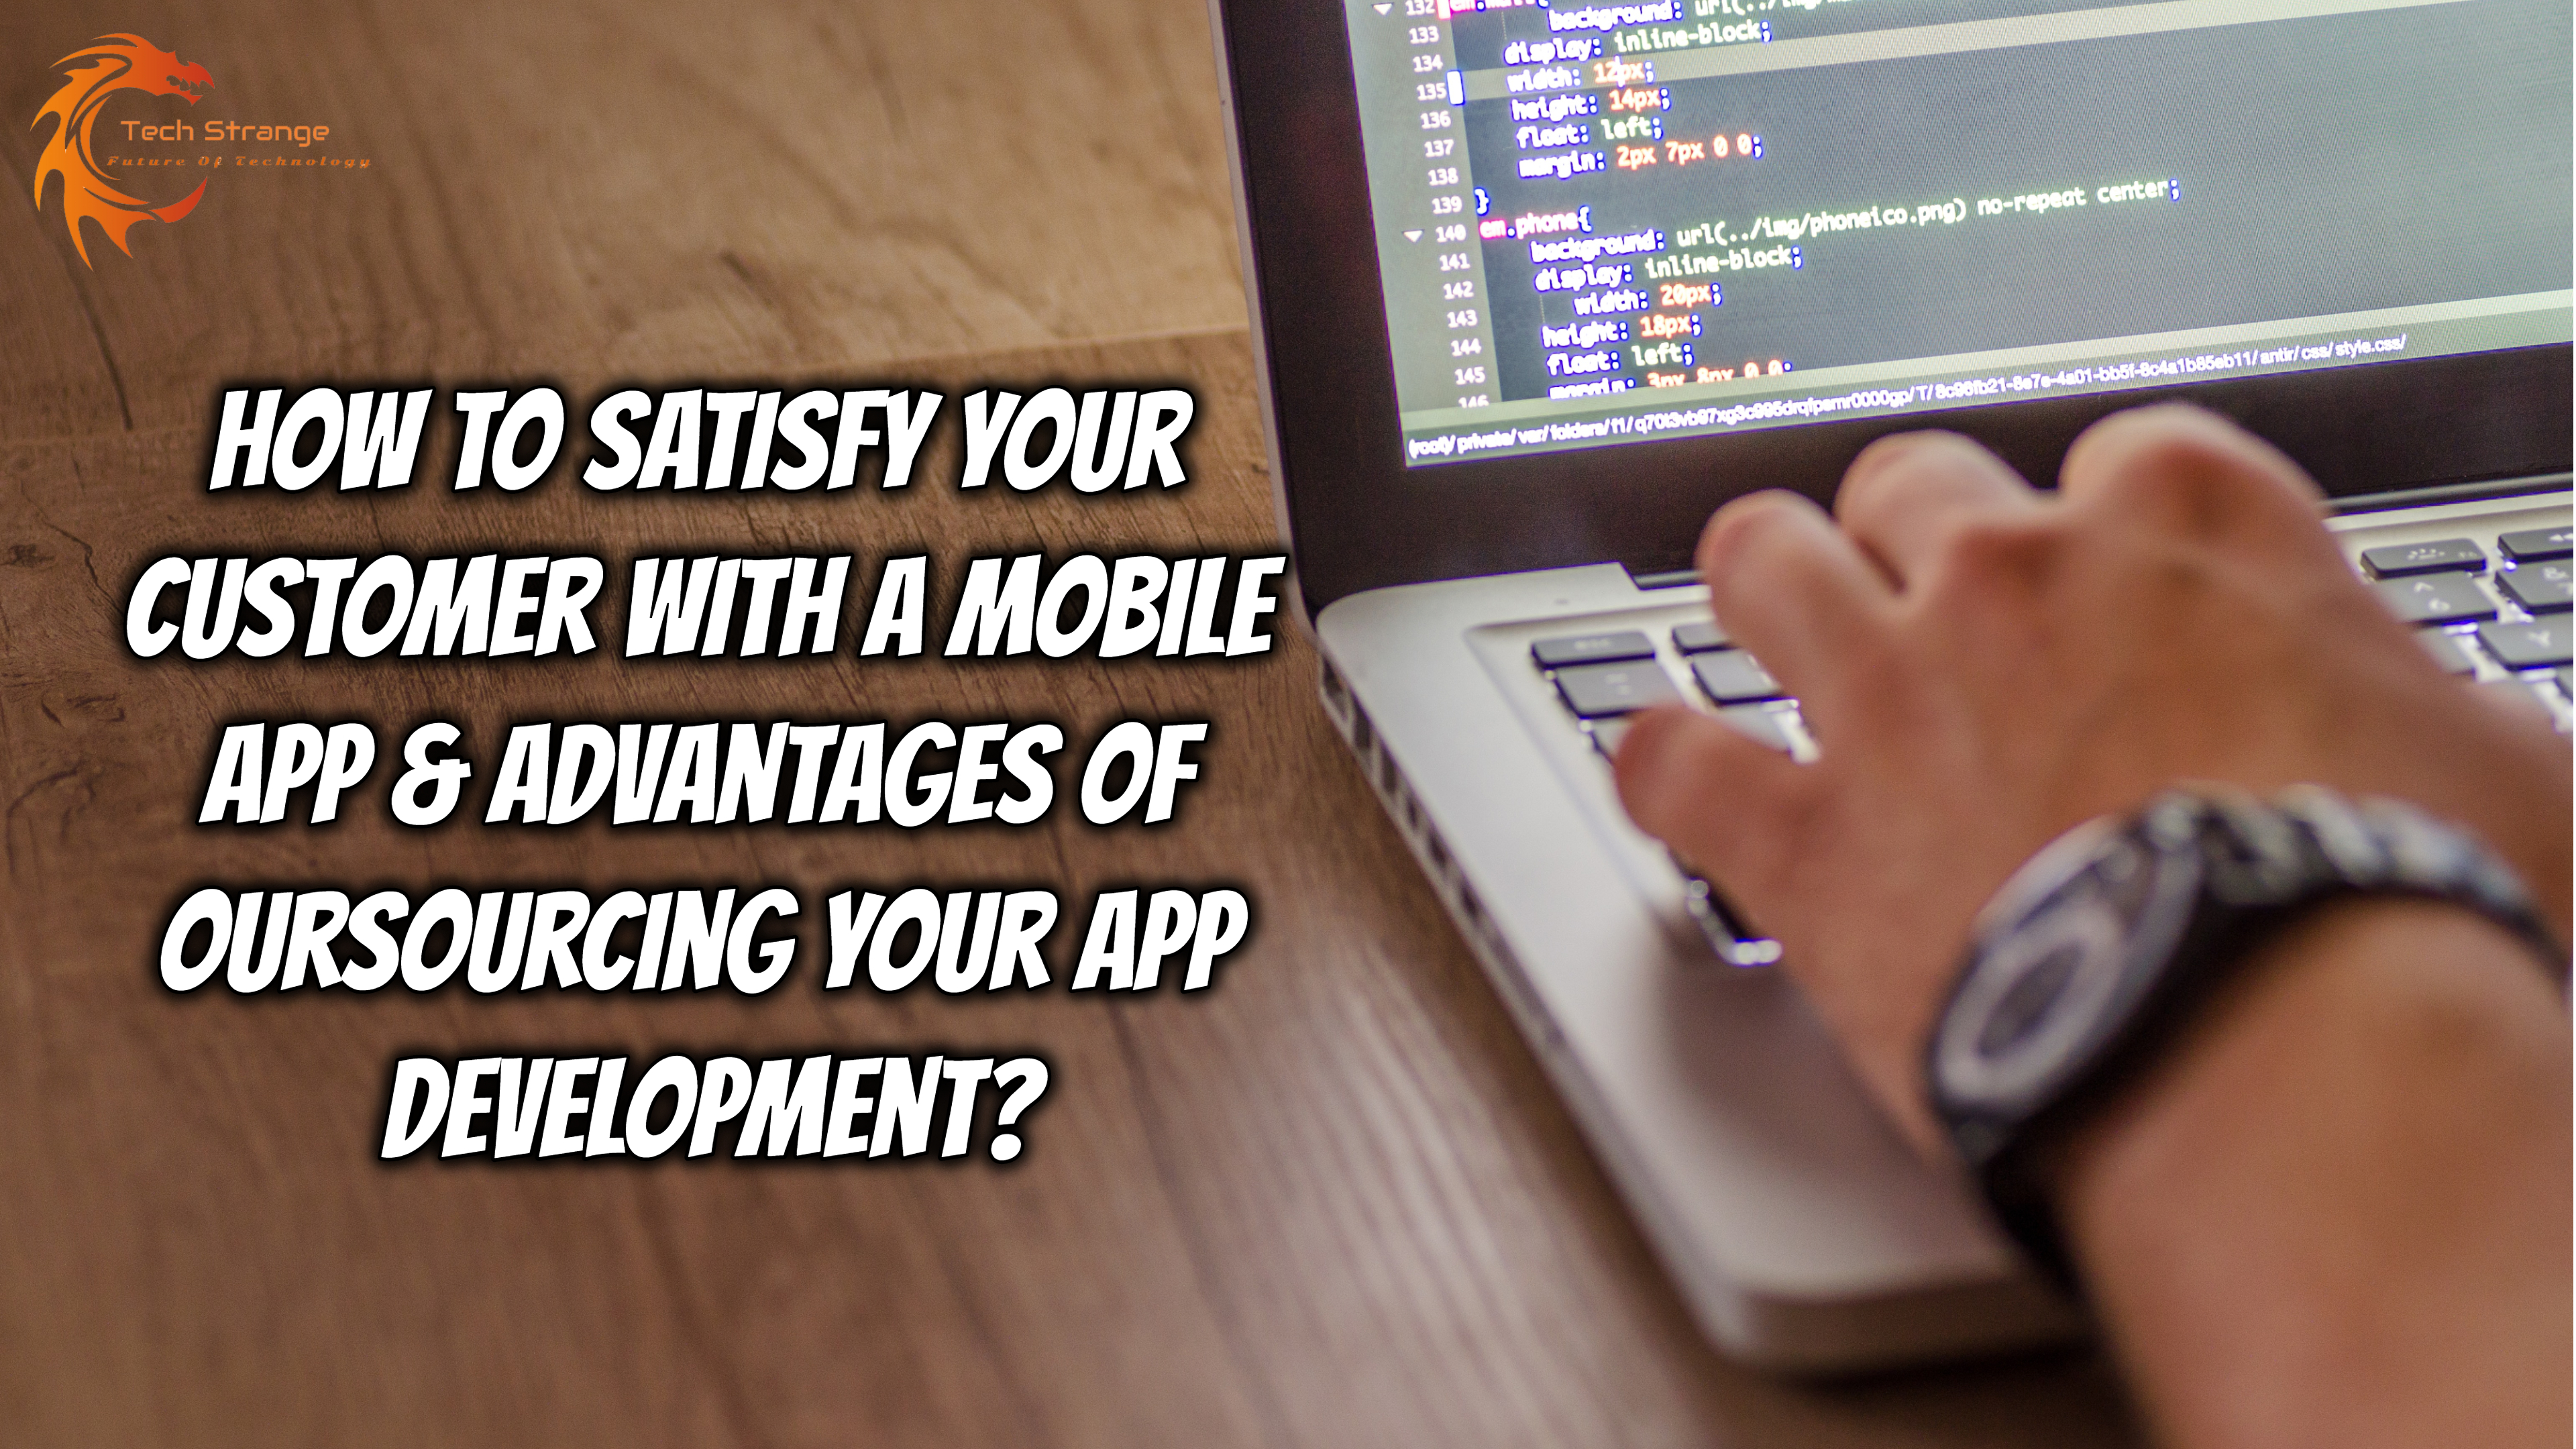 How to Satisfy your Customer with a Mobile App & advantages of Oursourcing your app development - Tech Strange